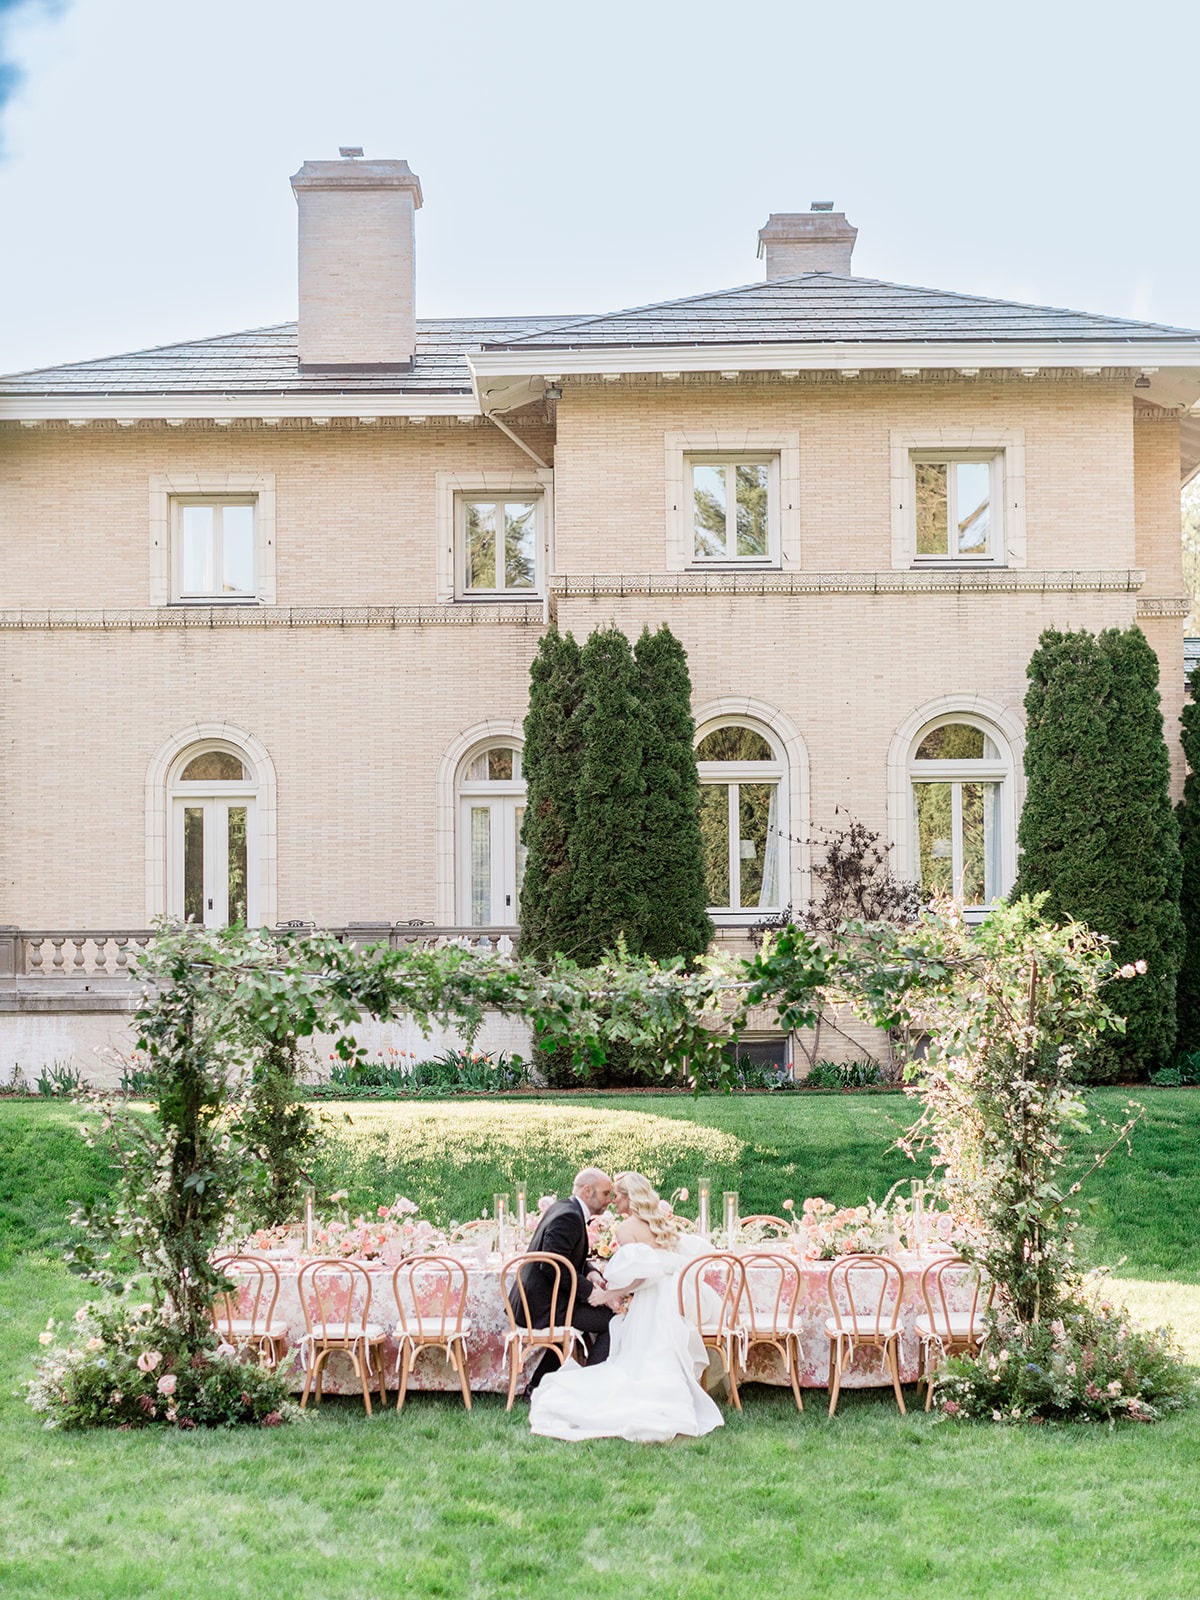 Dreamy and romantic wedding design overflowing with flowers